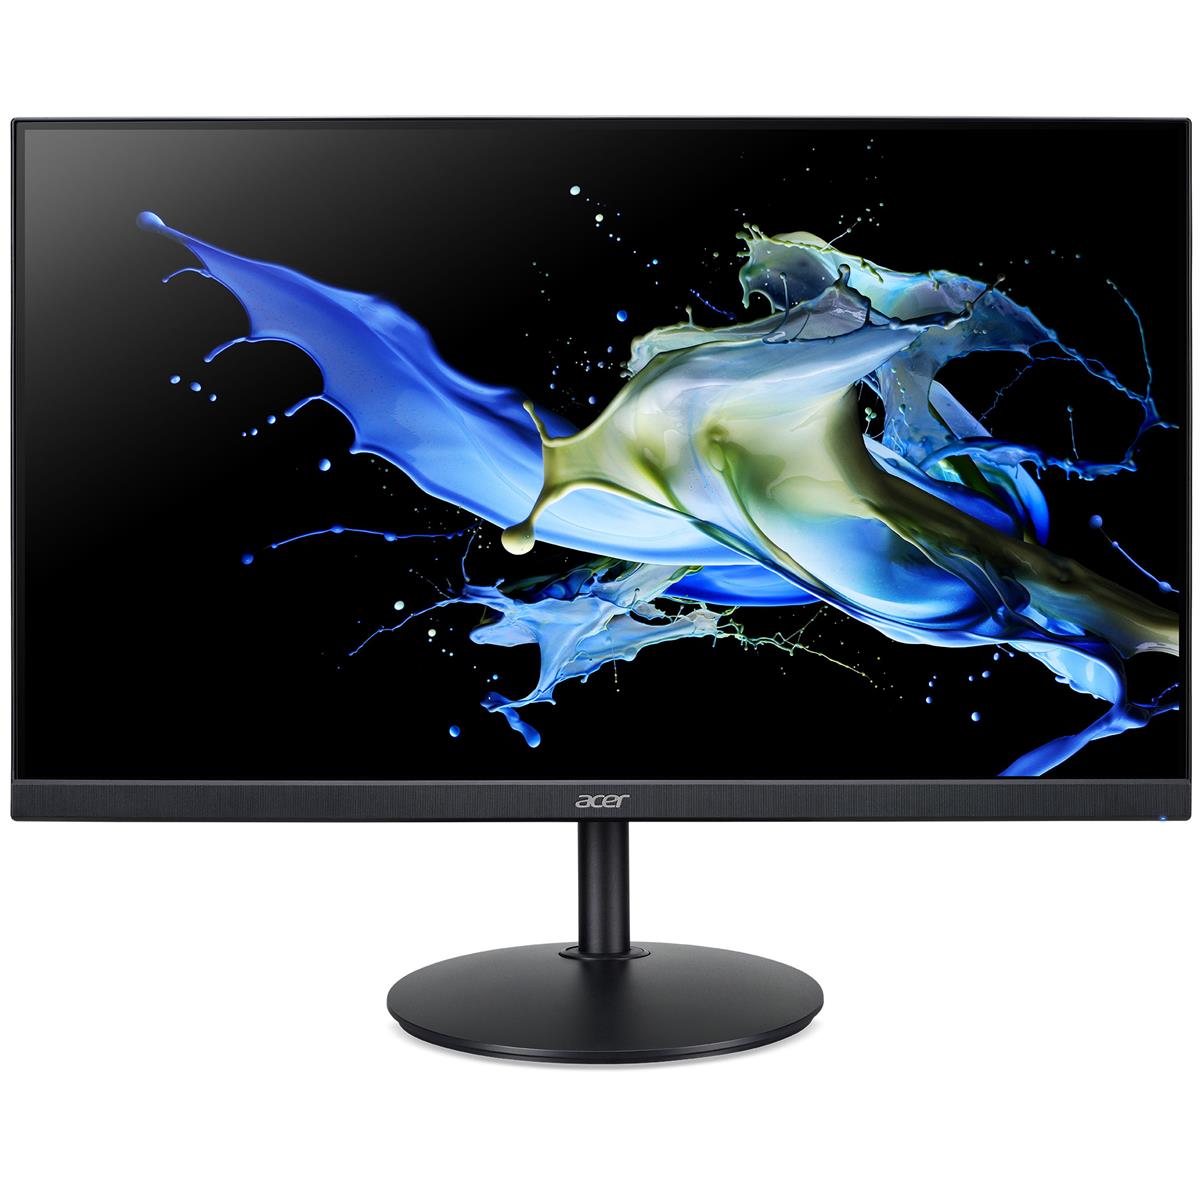 Acer CB272 Dbmiprcx 27" Full HD IPS Widescreen Monitor